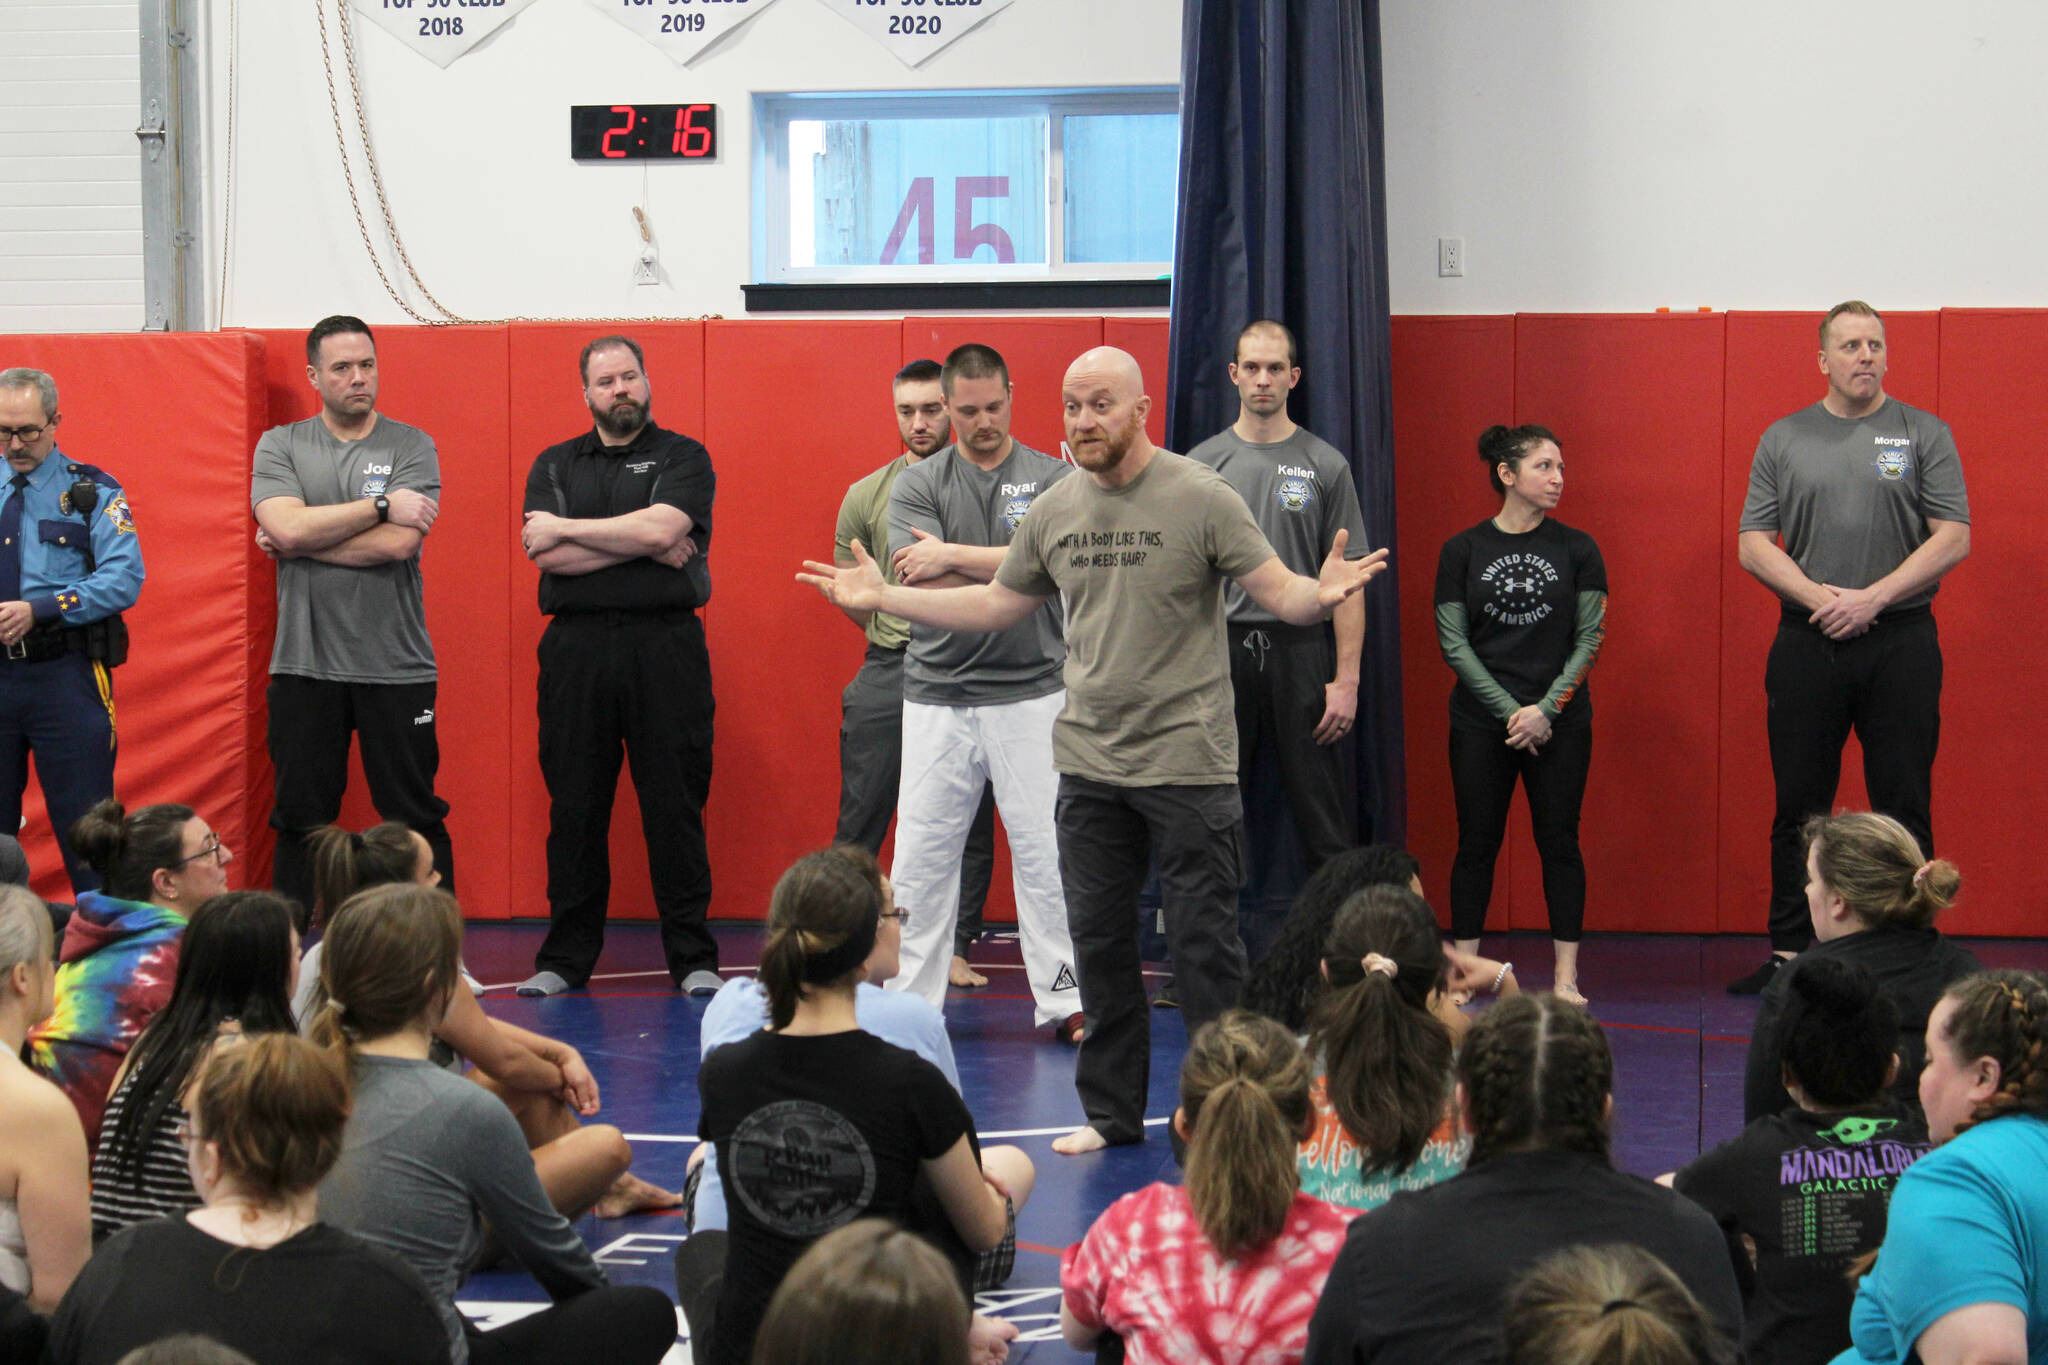 Soldotna Police Chief Gene Meek (center) speaks to attendees during a “Toss A Cop” event at the All American Training Center on Saturday, Jan. 21, 2023, in Soldotna, Alaska. (Ashlyn O’Hara/Peninsula Clarion)